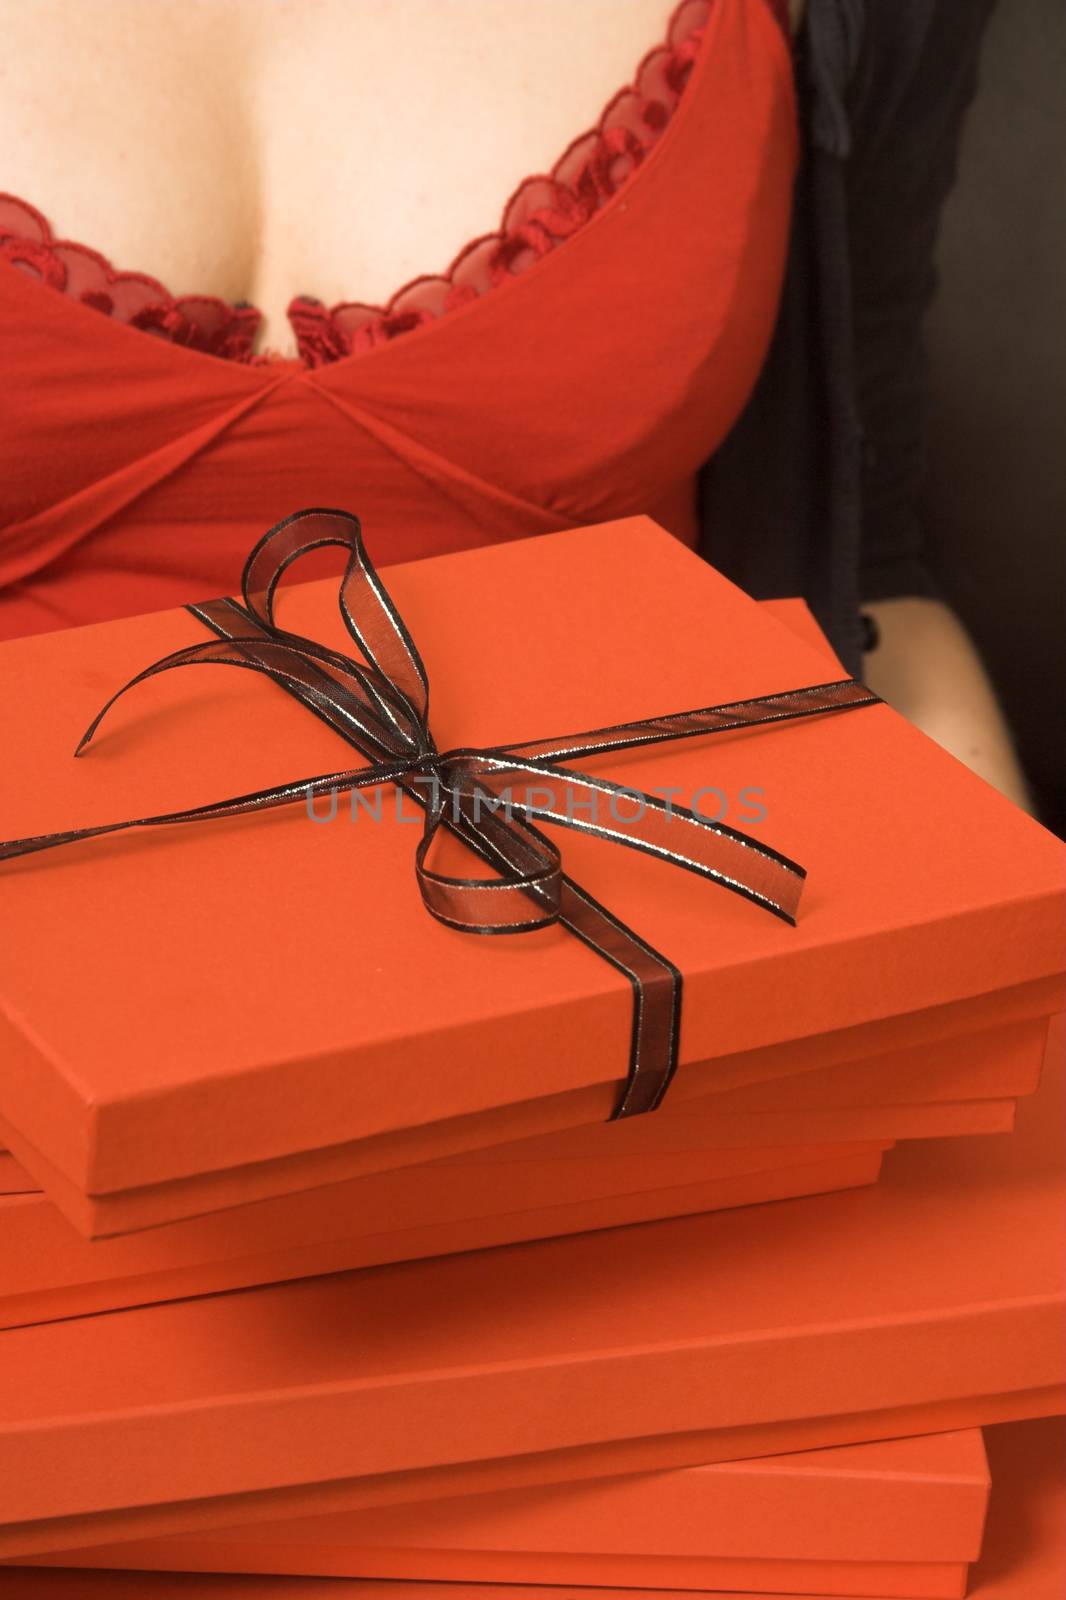 A stack of red gift boxes, the top one tied with black ribbon